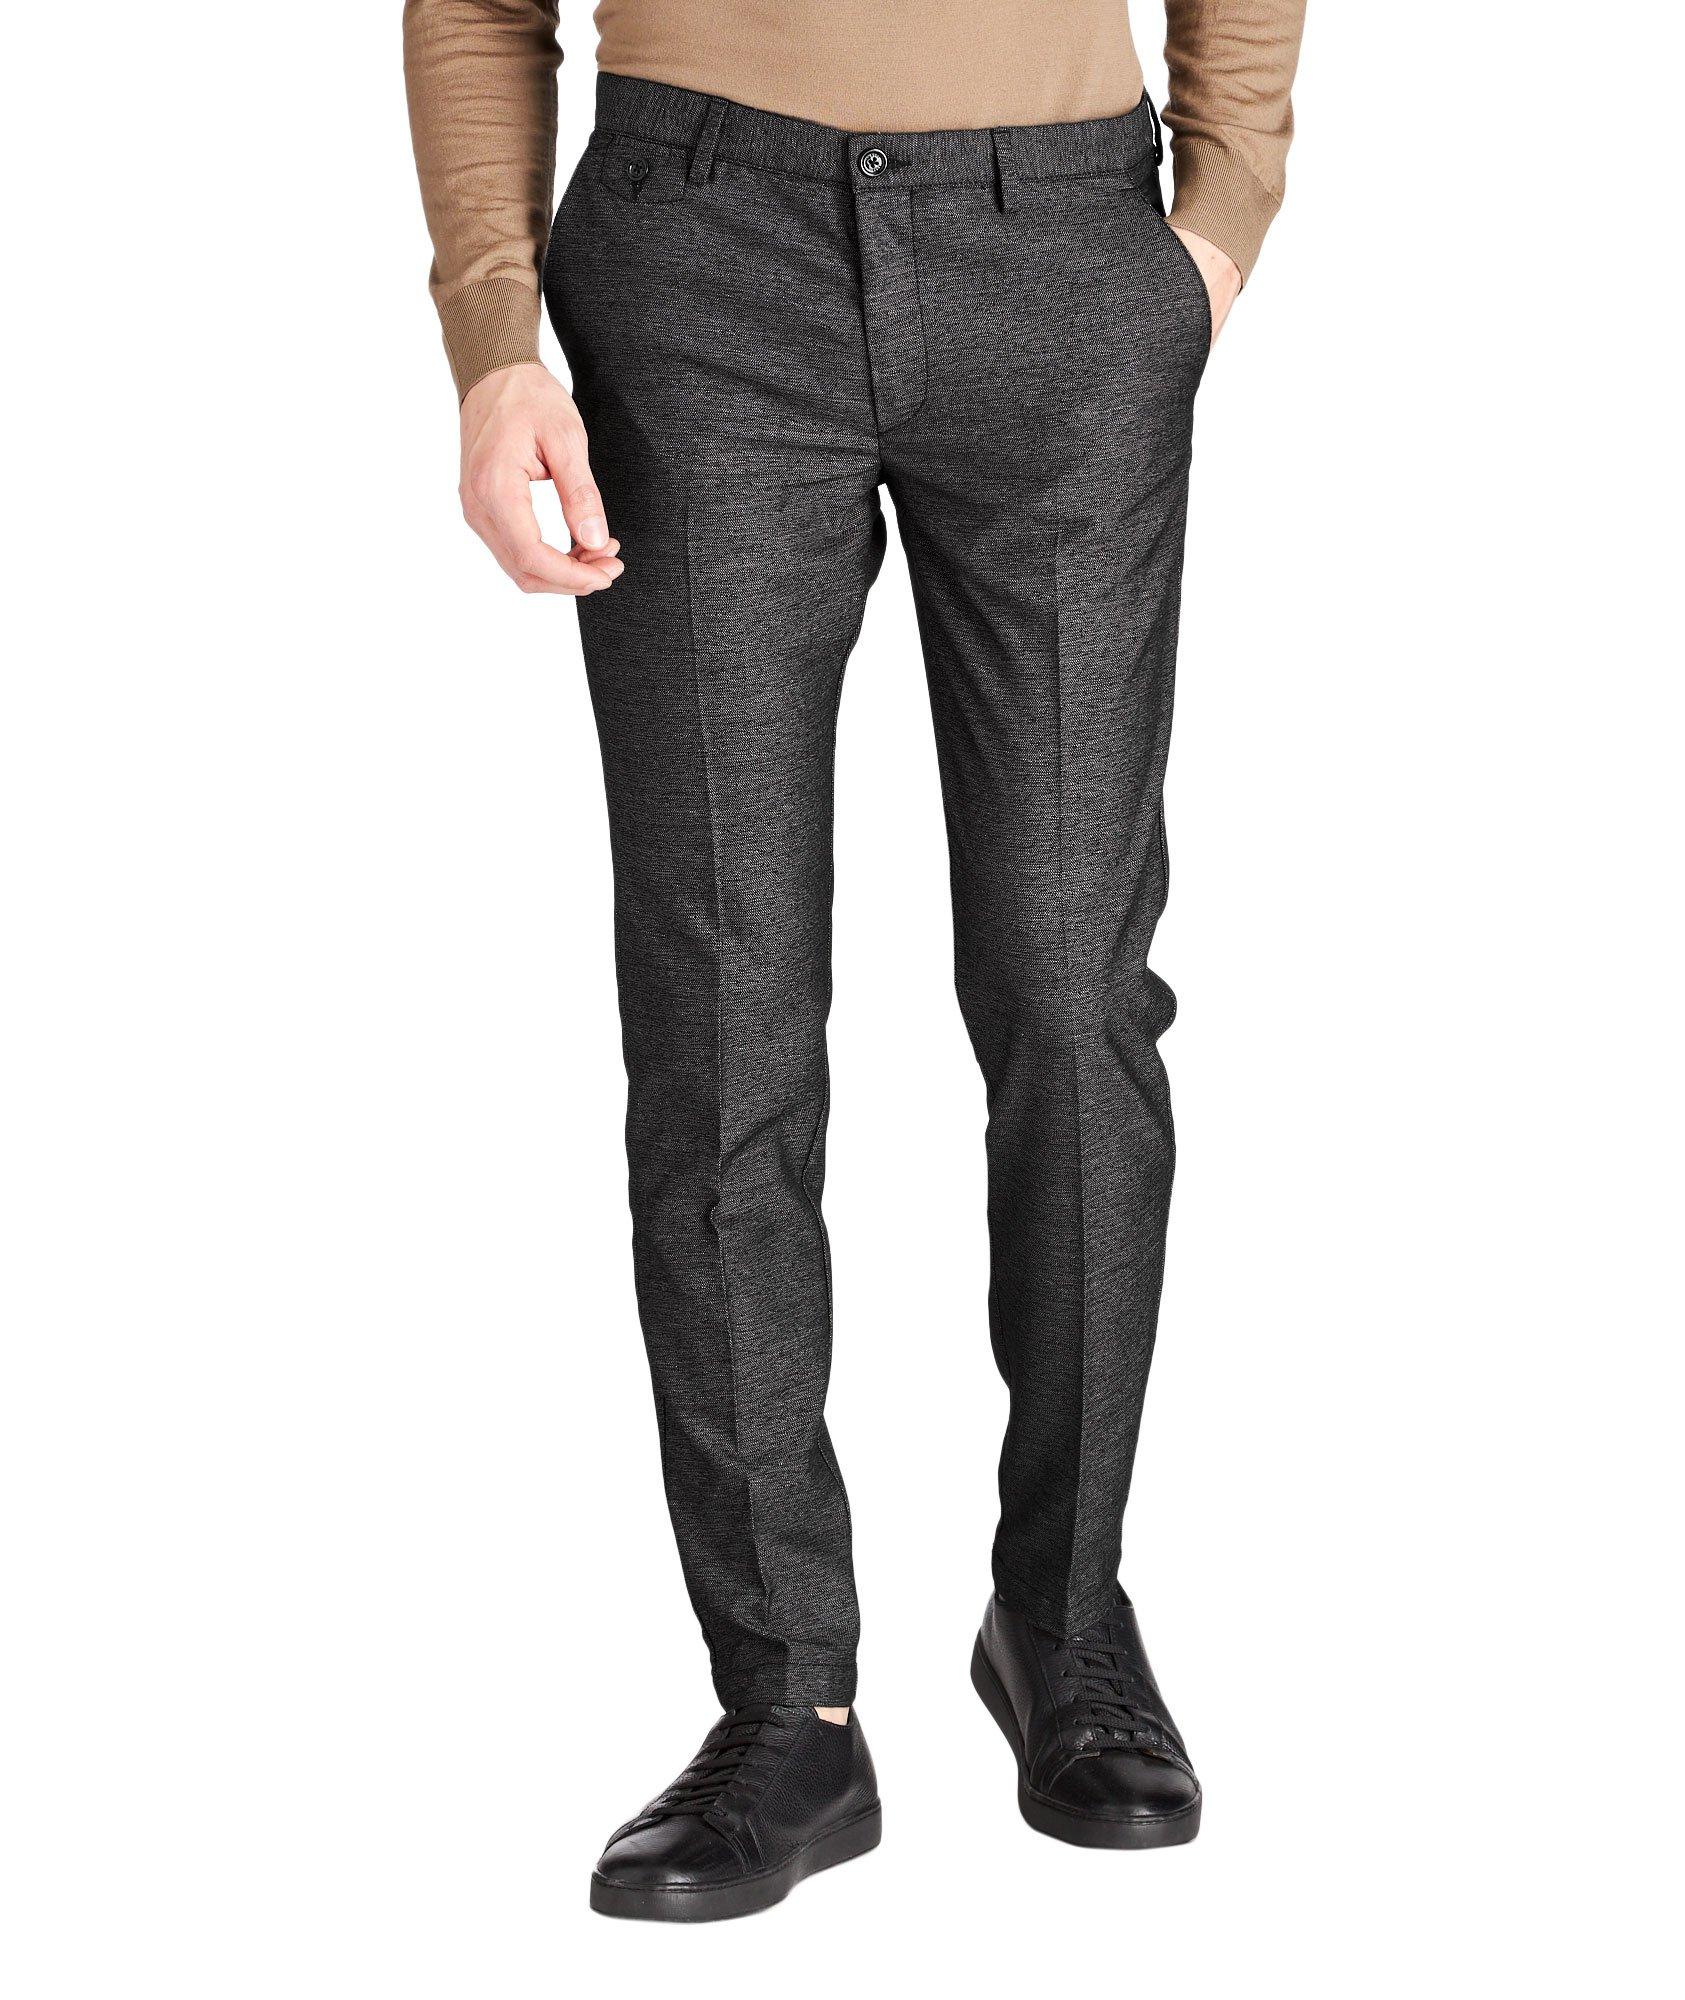 Kaito Slim Fit Stretch-Blend Pants image 0